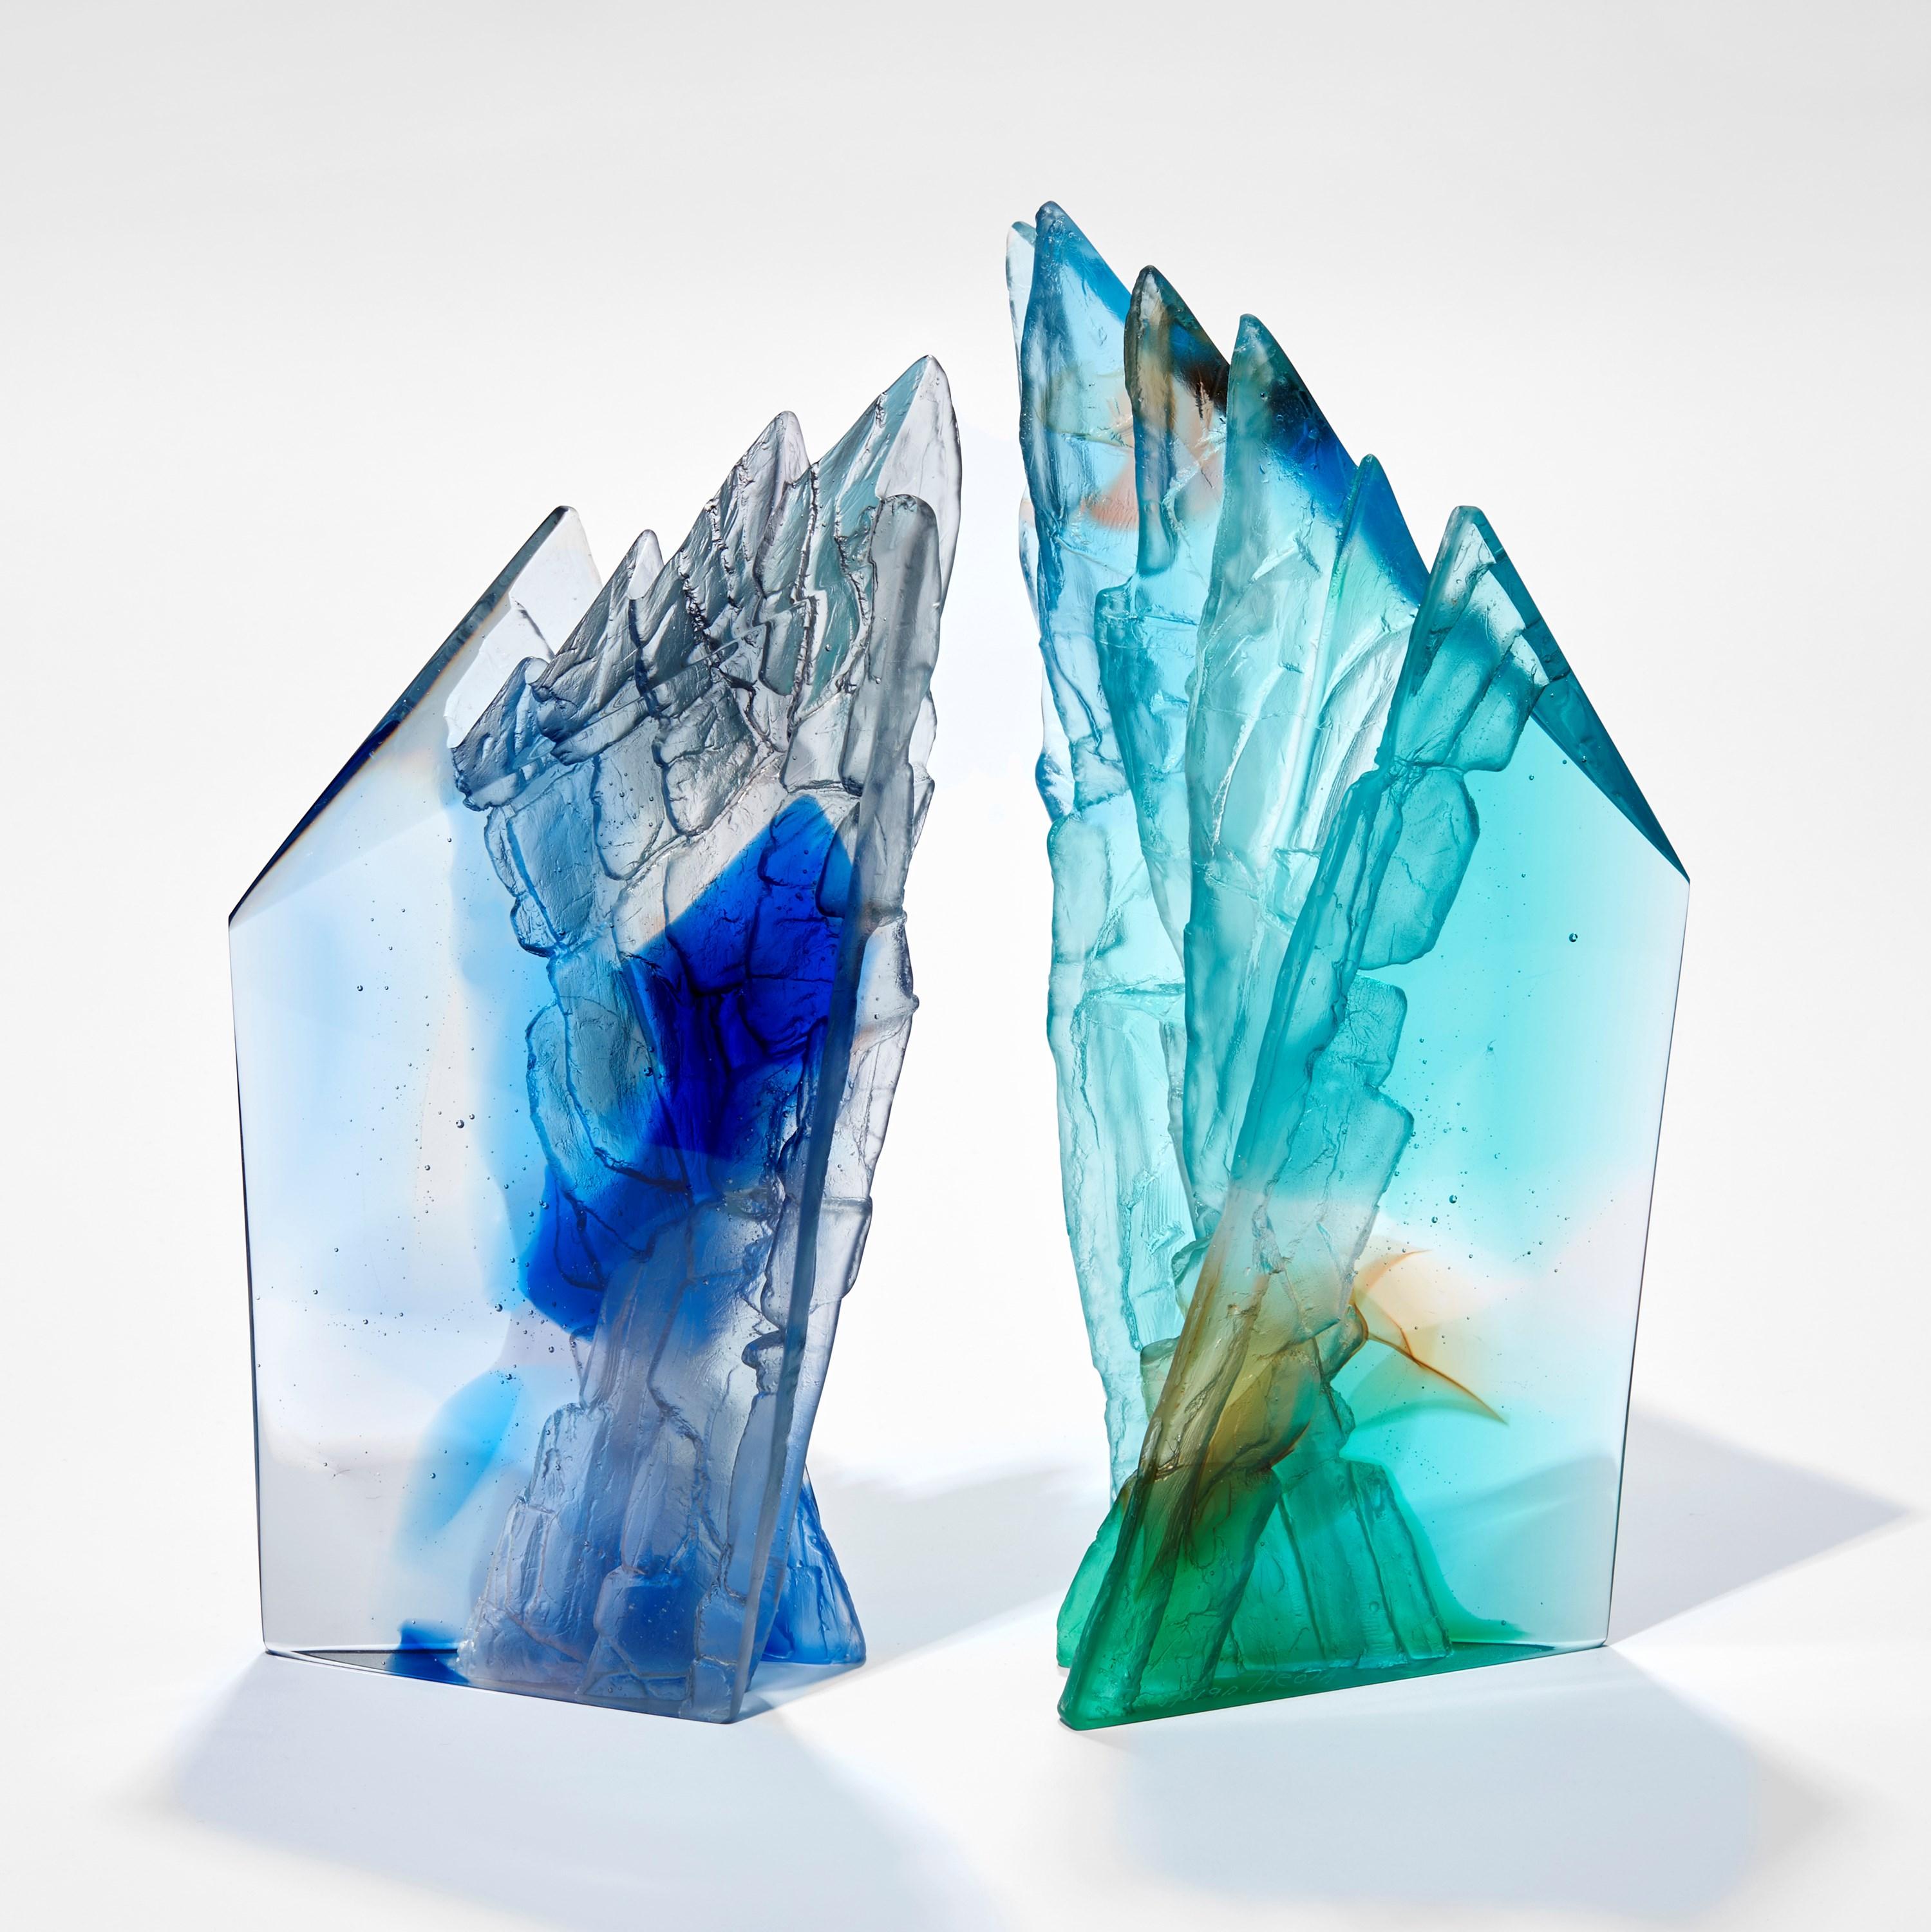 Cut Glass Turquoise Cliff II, a Turquoise & Jade Cast Glass Sculpture by Crispian Heath